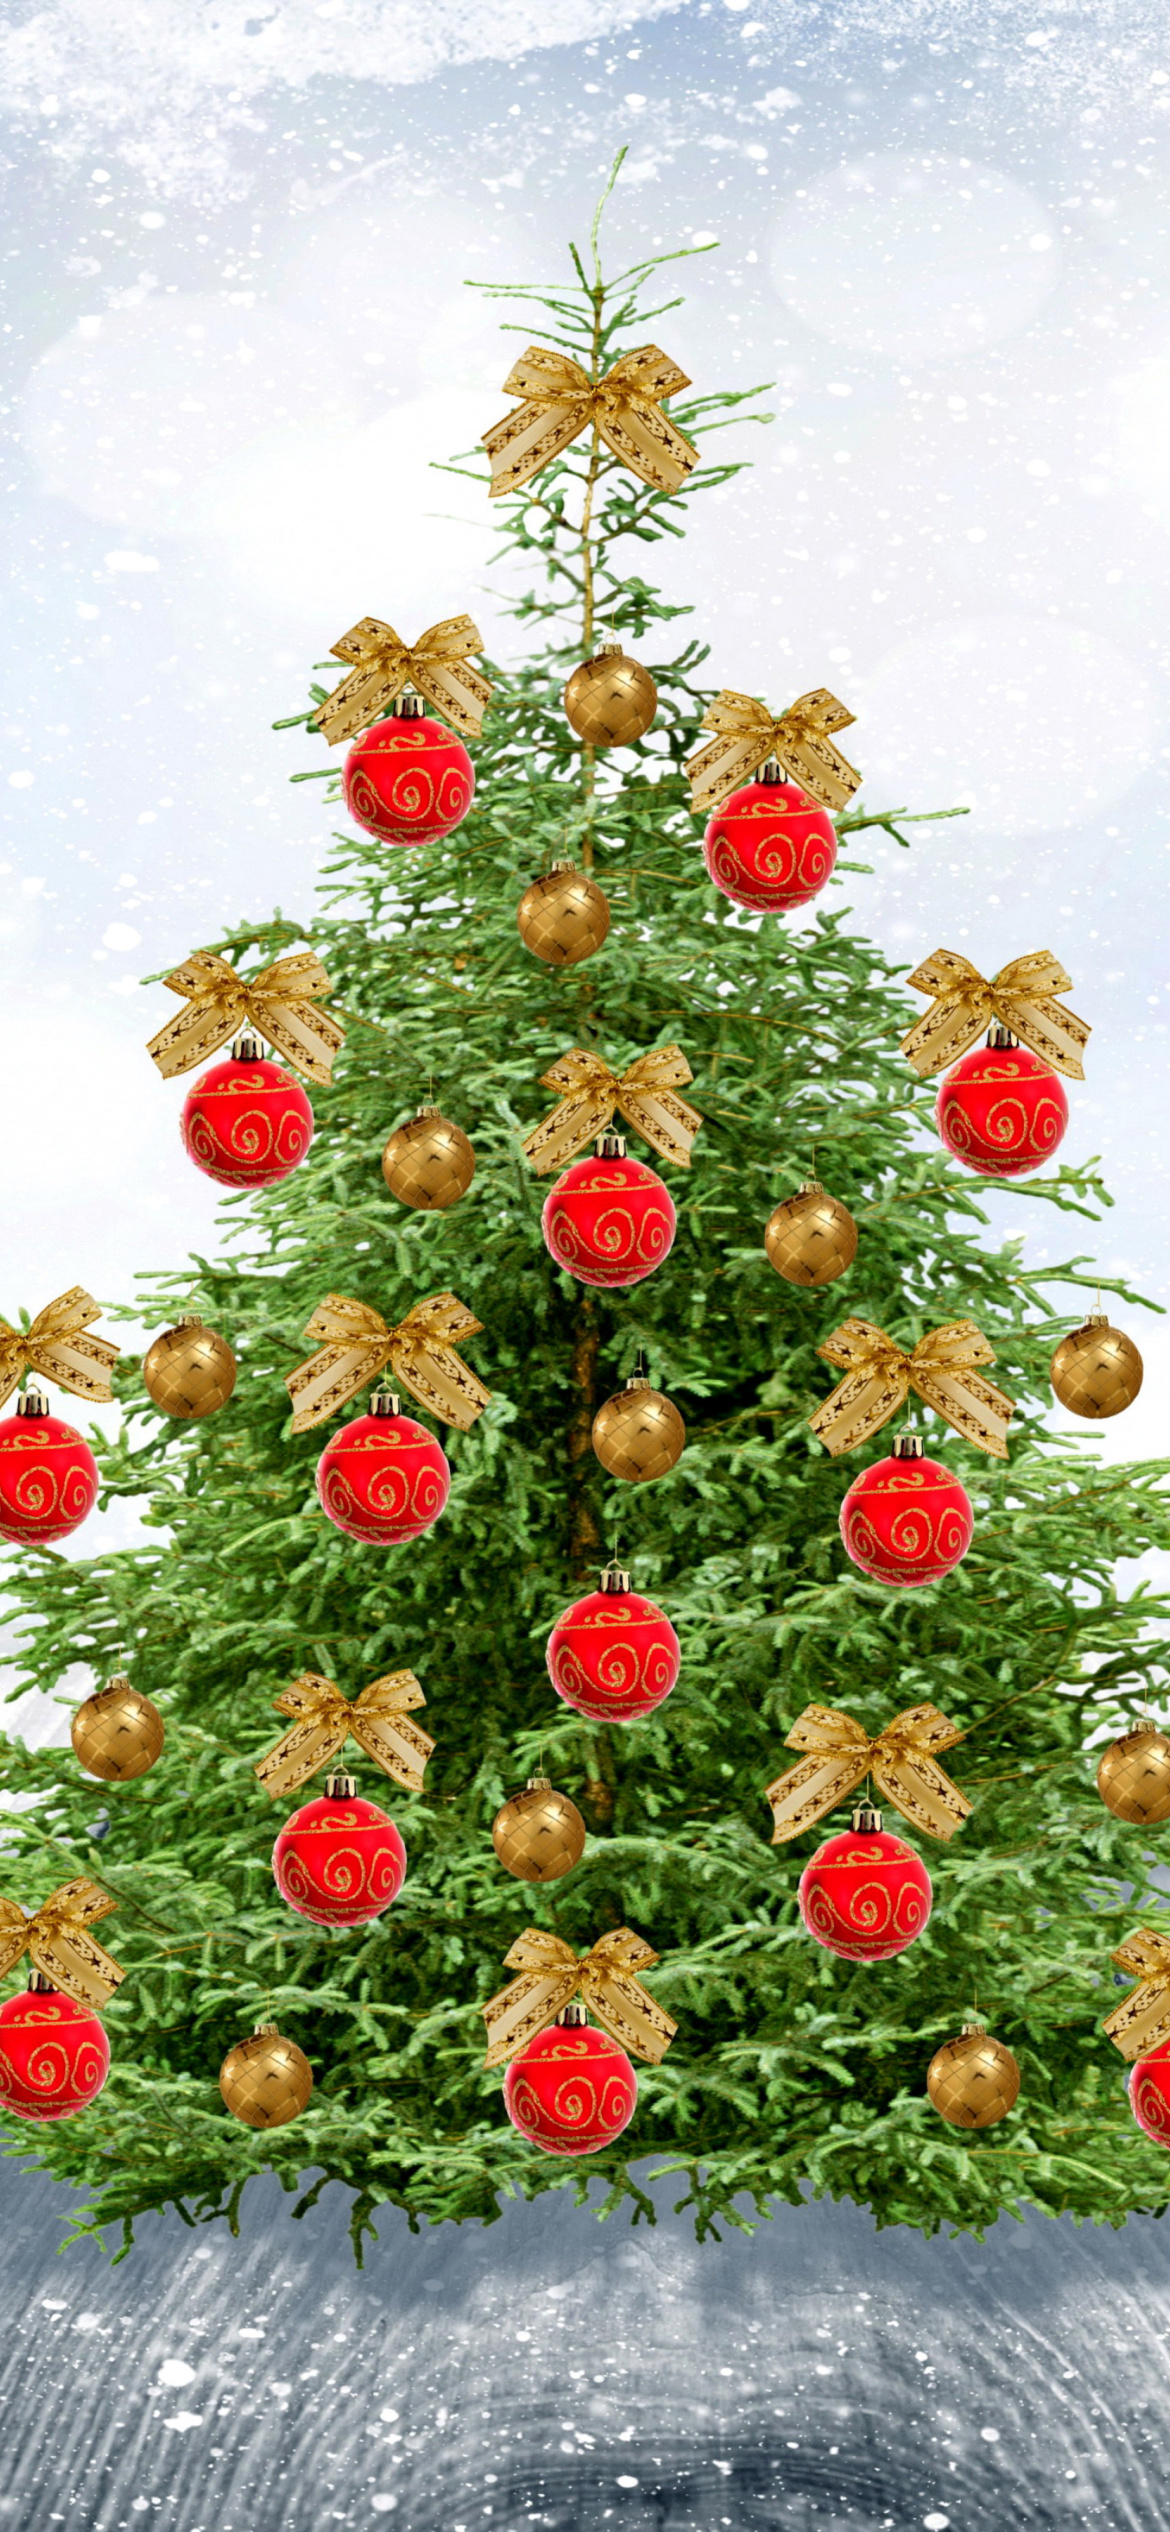 New Year Tree with Snow wallpaper 1170x2532